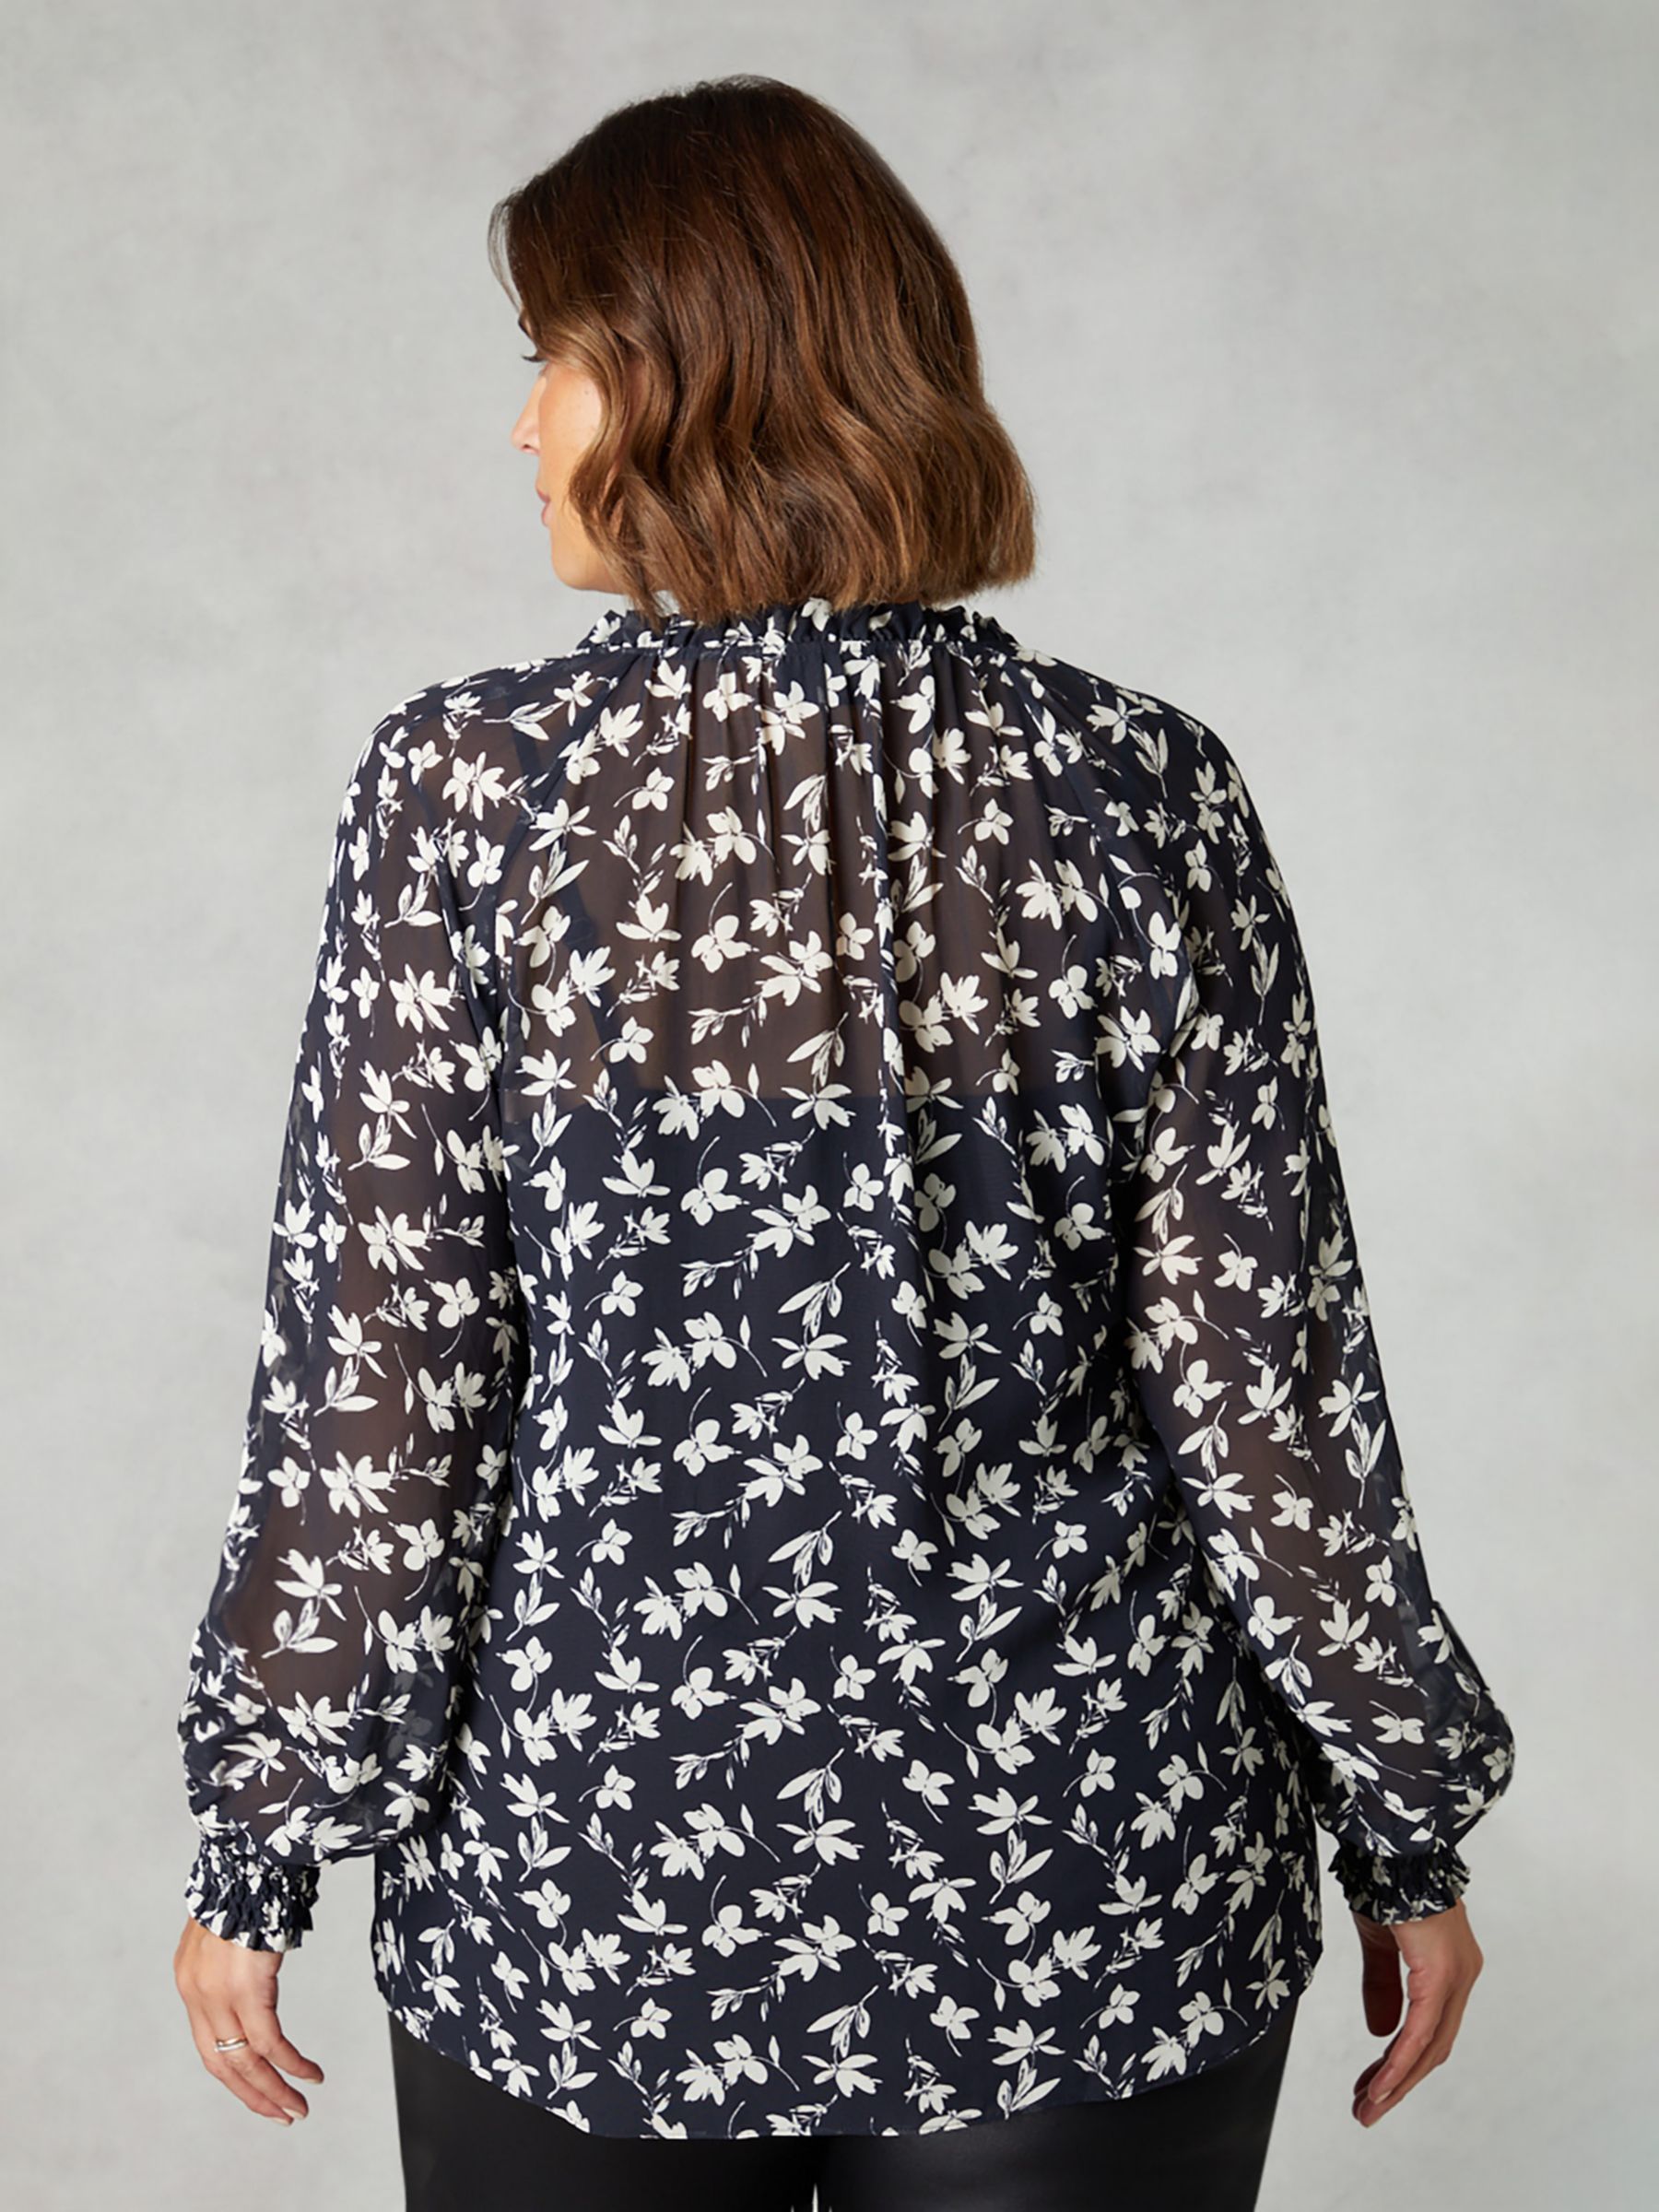 Buy Live Unlimited Curve Floral Print Ruffle Front Blouse, Black/White Online at johnlewis.com